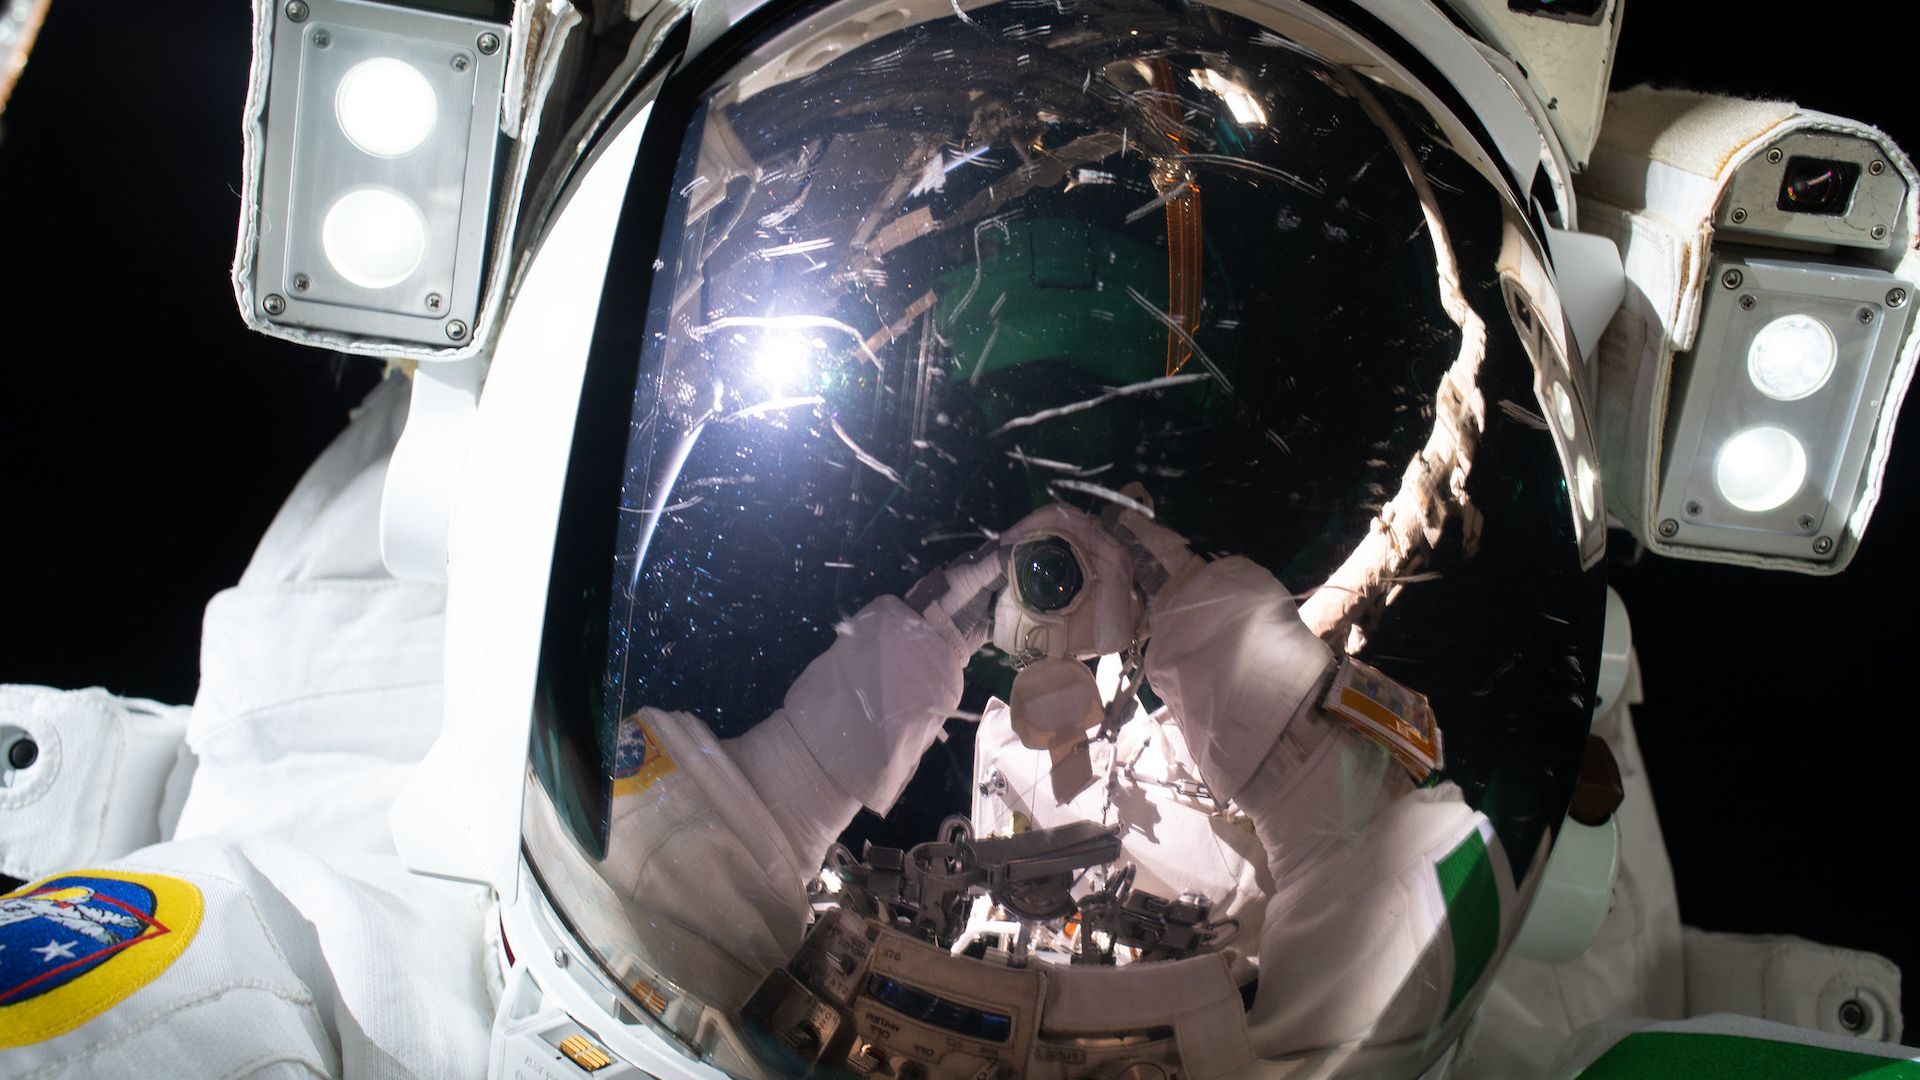 An astronaut's visor reflects a camera as he holds it up to take a selfie in space